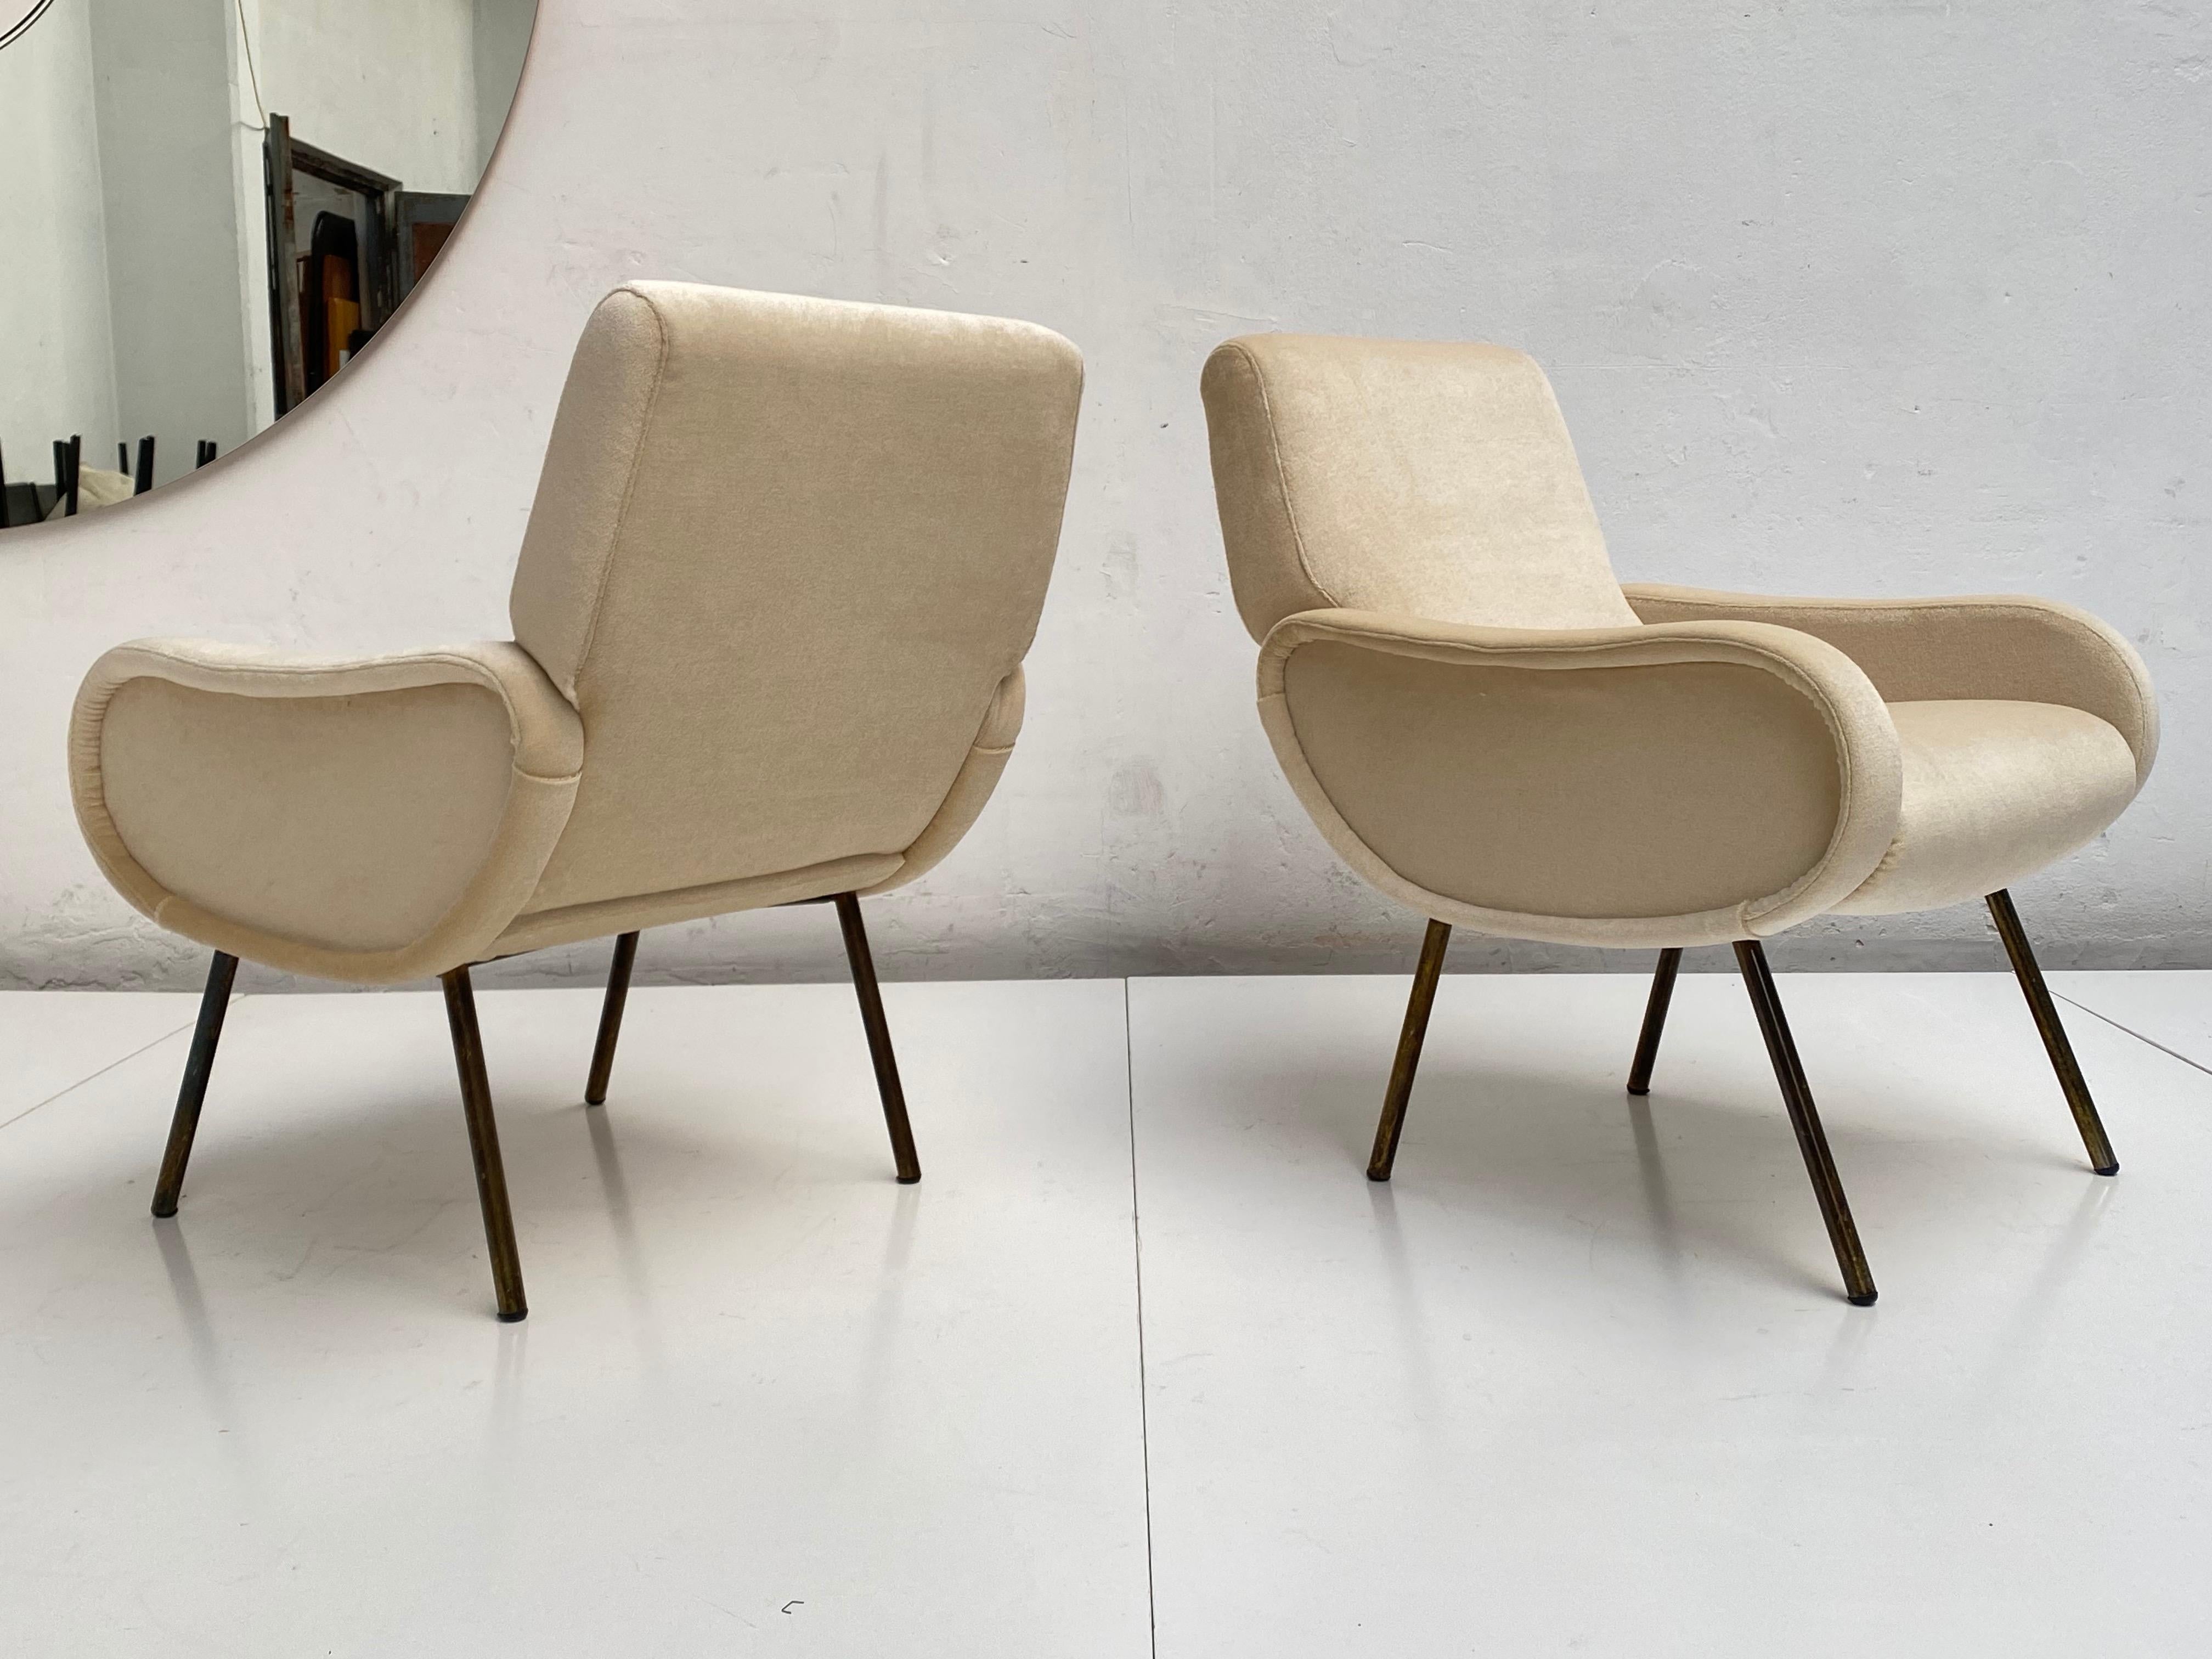 Hand-Crafted Zanuso Mohair 'Baby' Lounge Chairs, Early Wood Frames, Brass Legs, Arflex, 1951 For Sale